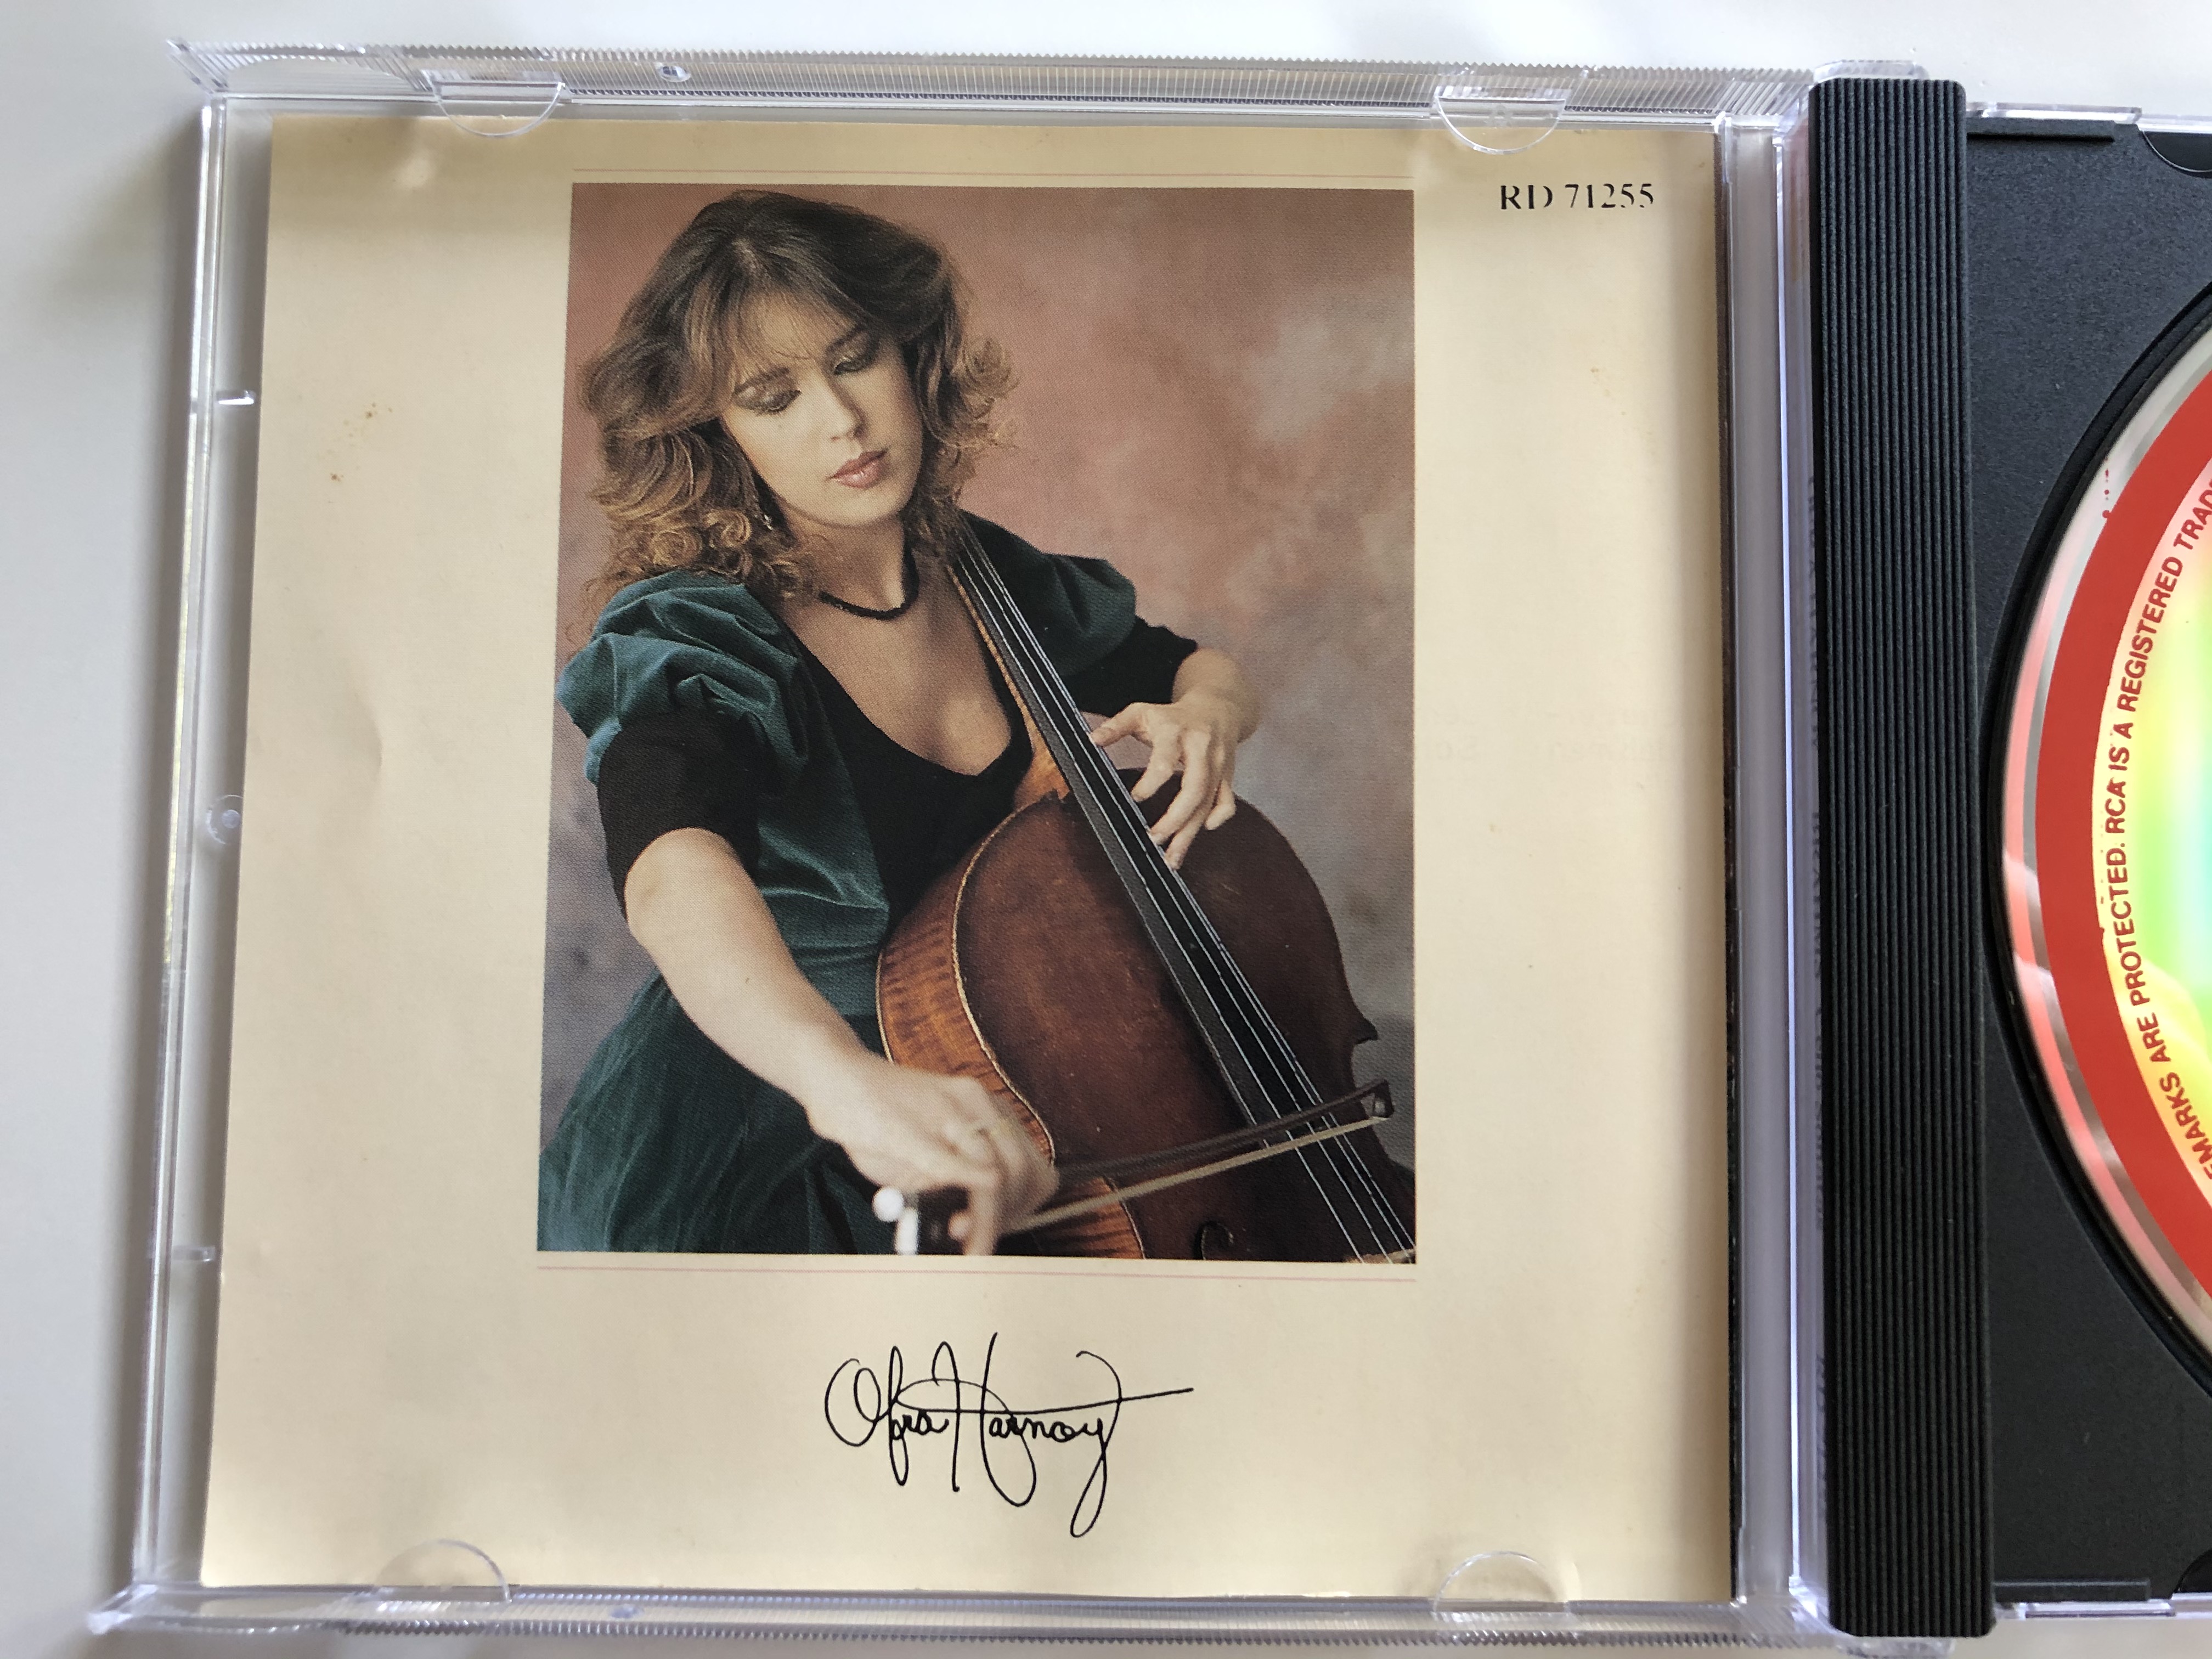 ofra-harnoy-brahms-cello-sonatas-rca-red-seal-audio-cd-1986-rd-71255-5-.jpg